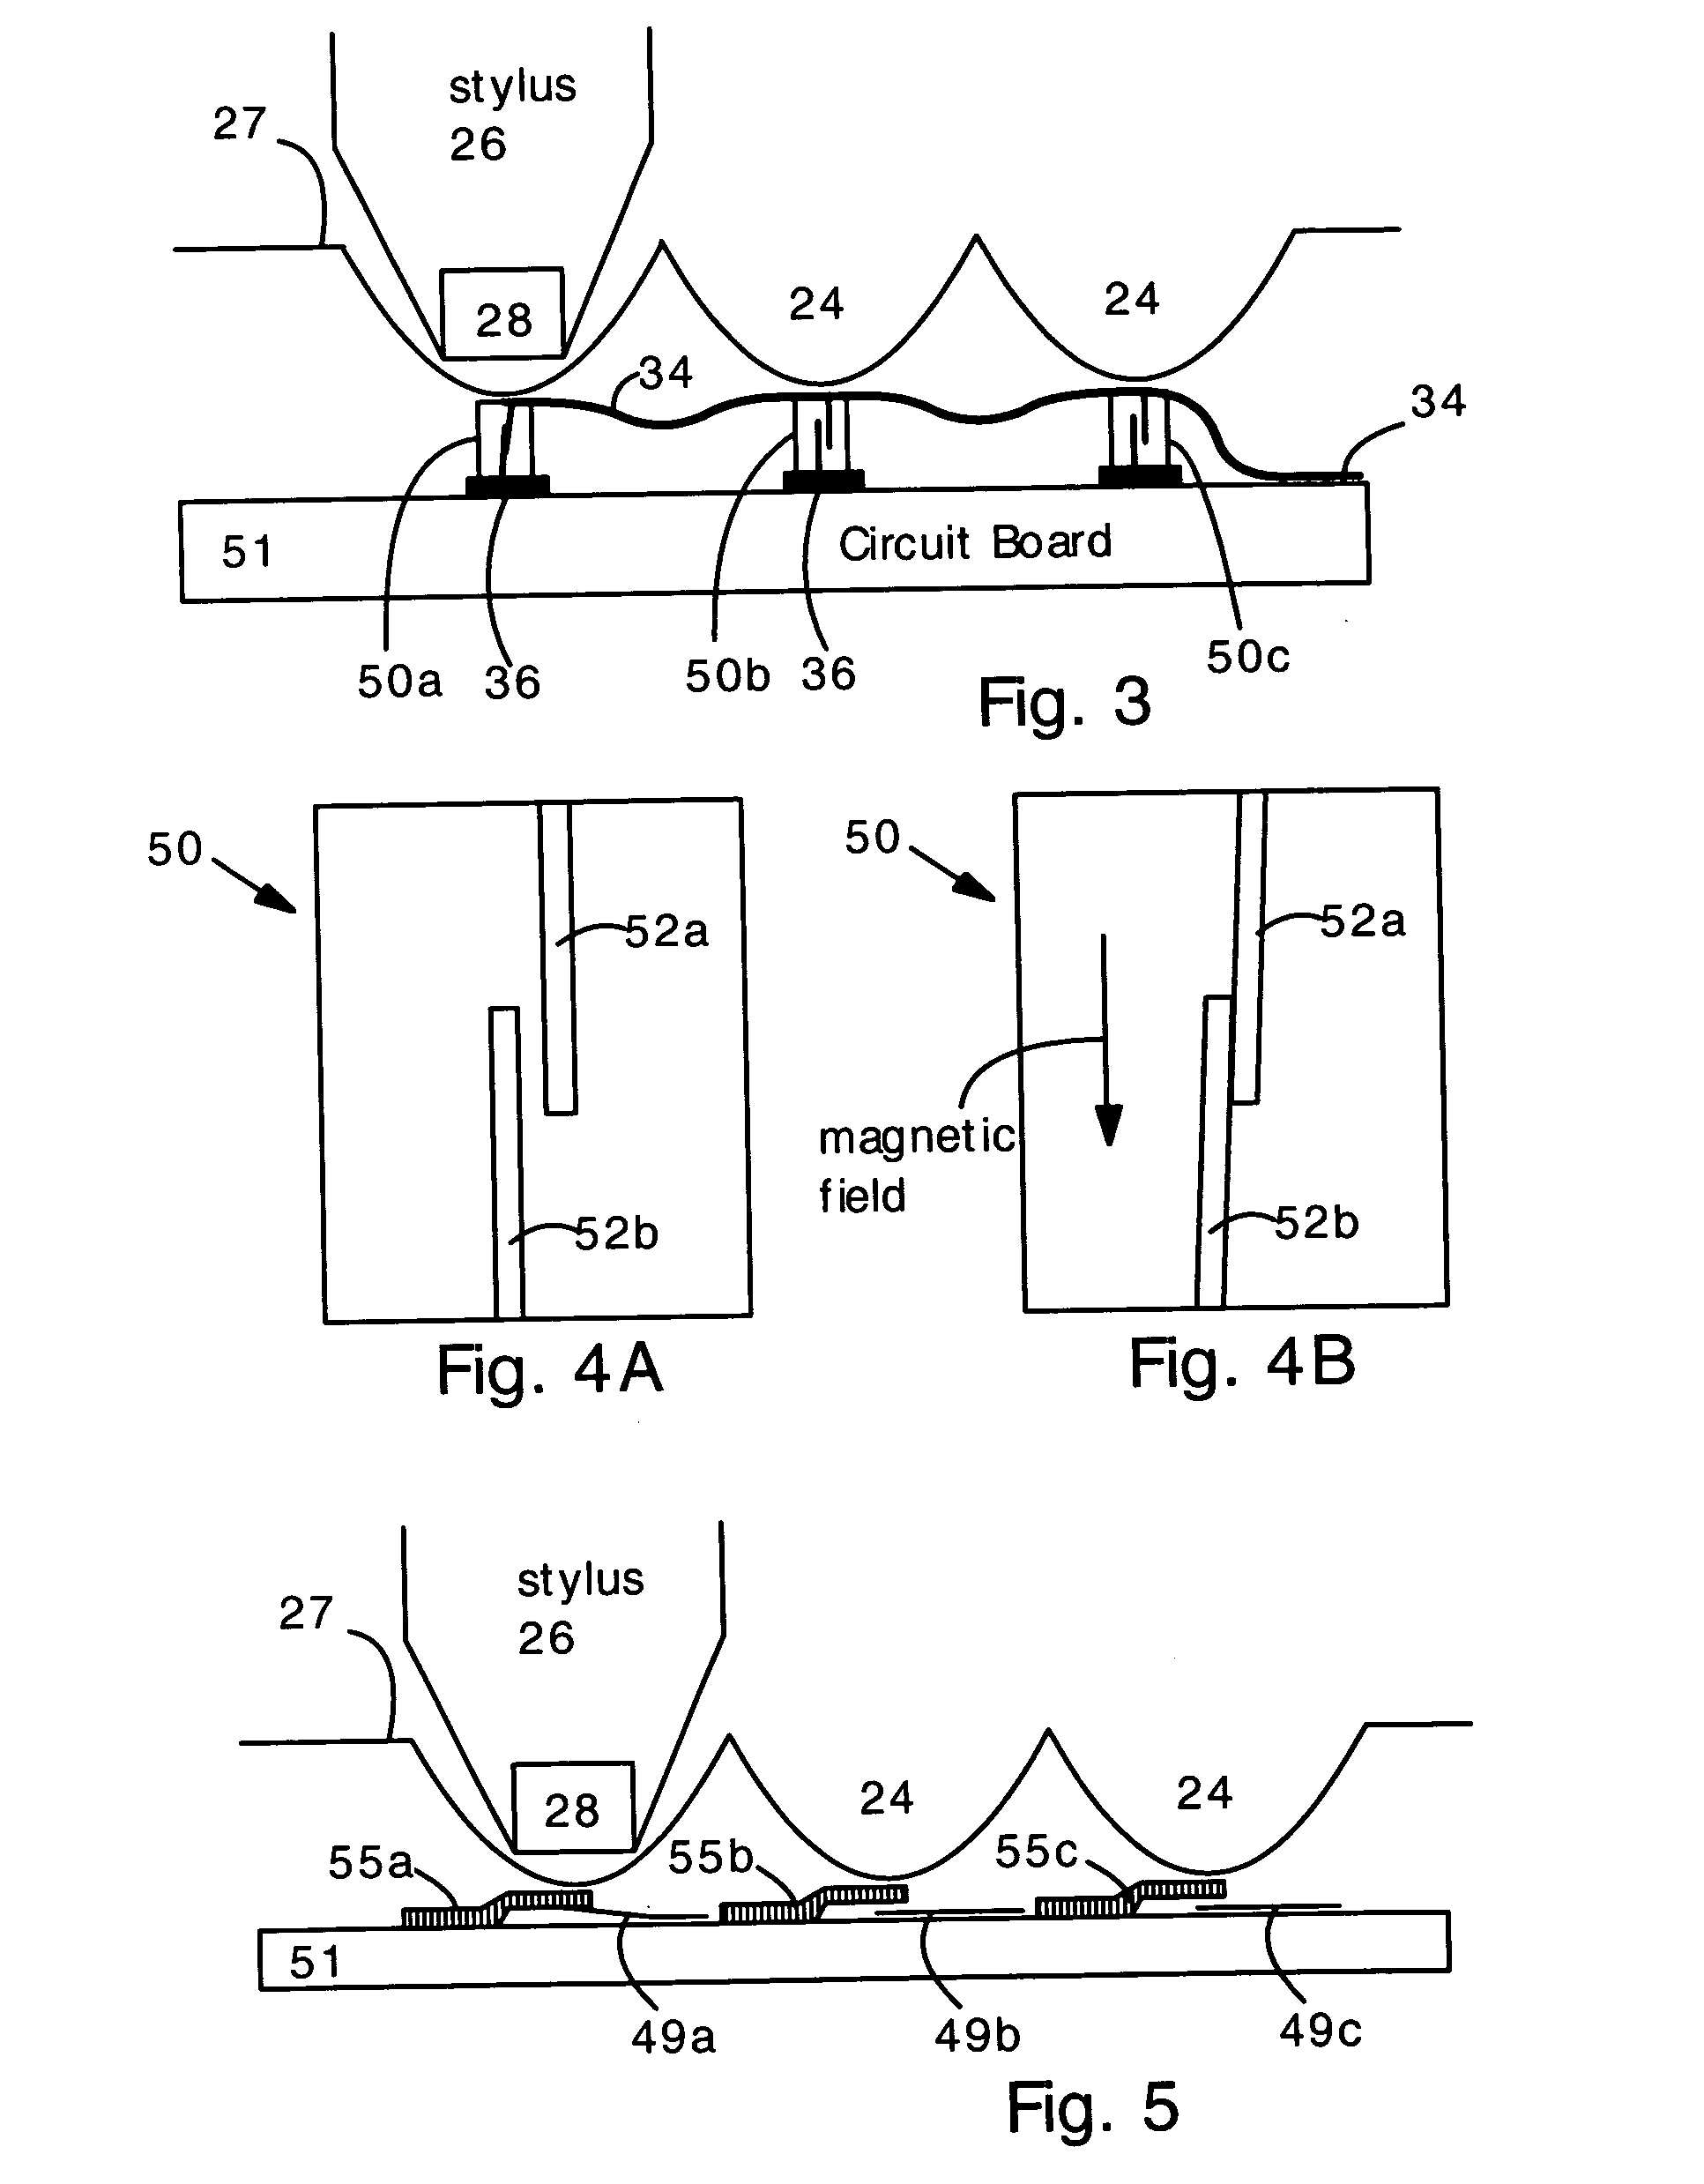 Keyboard having magnet-actuated switches or sensors